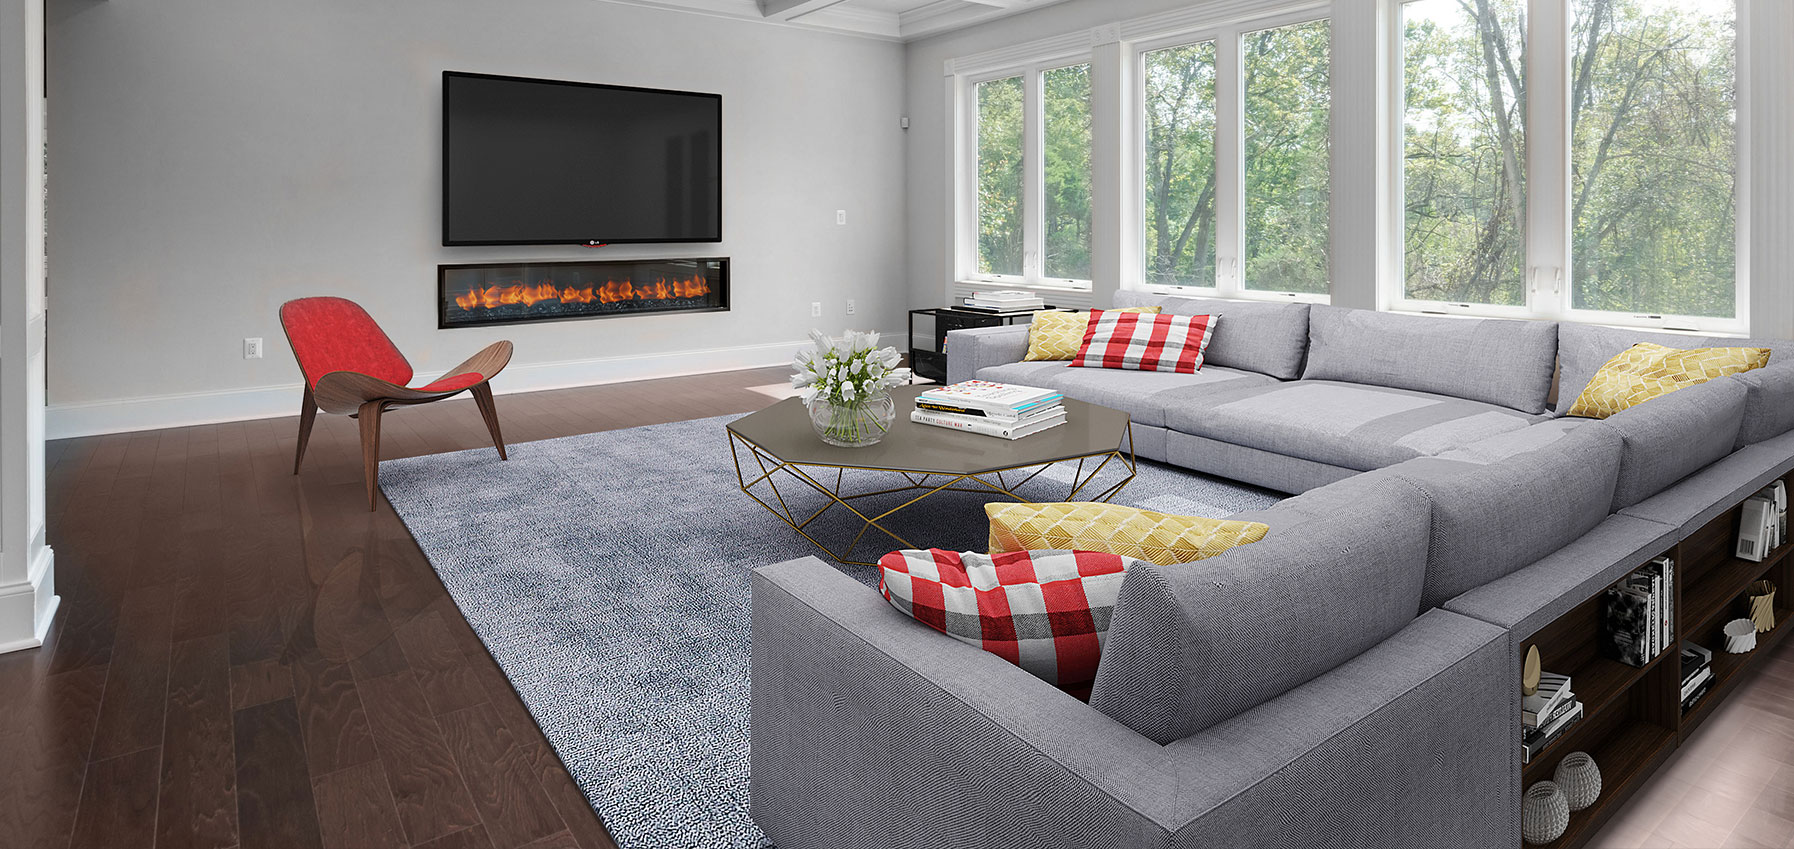 A family room with large row of windows and linear fireplace with flames